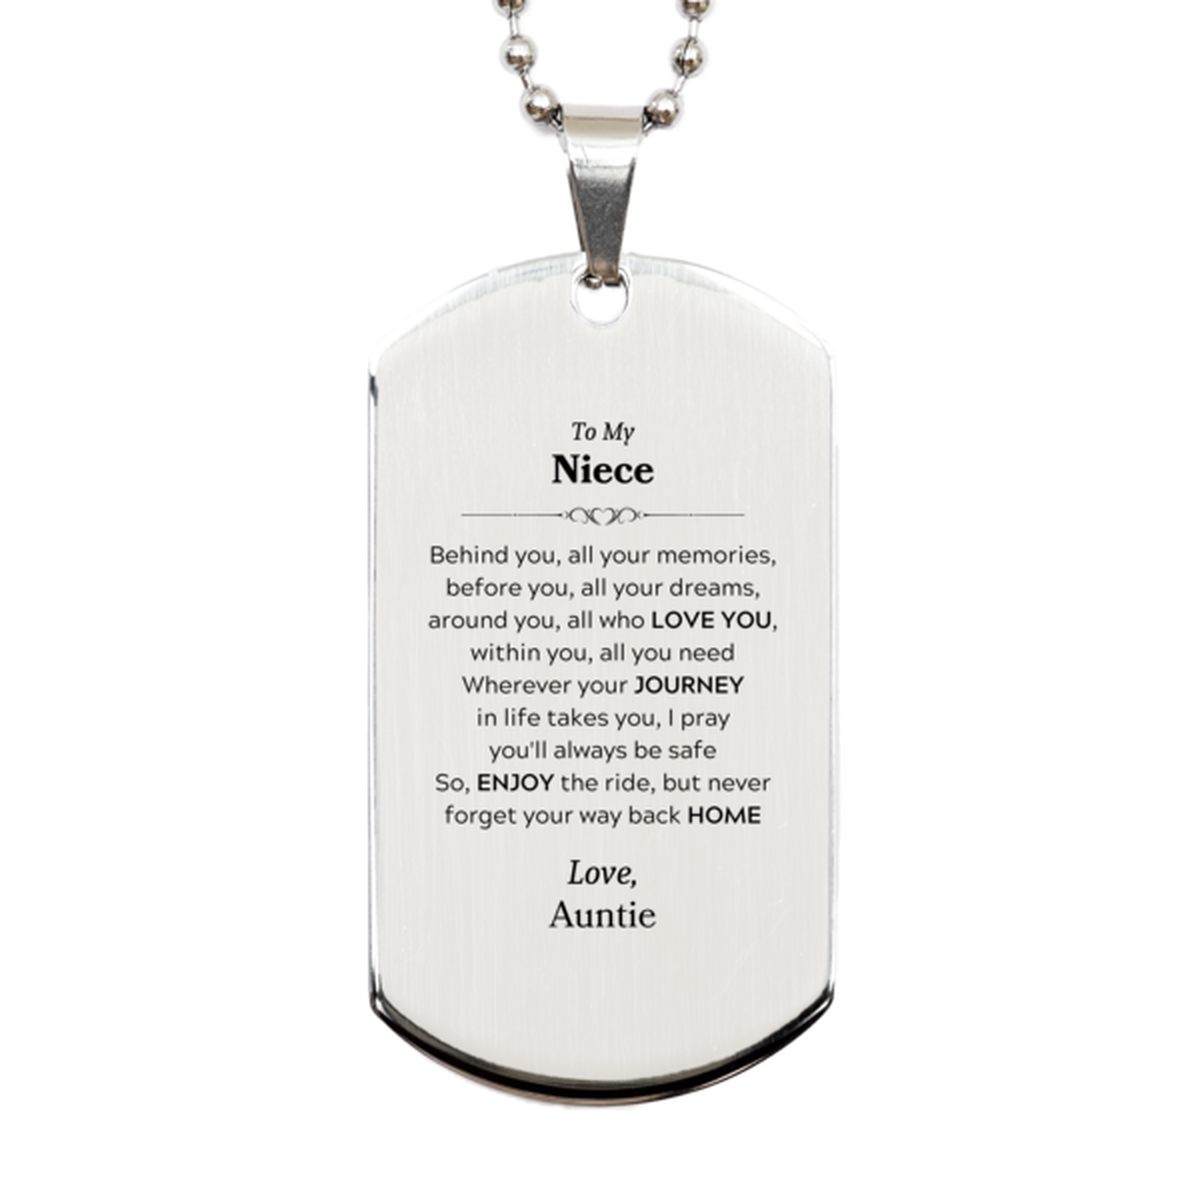 To My Niece Graduation Gifts from Auntie, Niece Silver Dog Tag Christmas Birthday Gifts for Niece Behind you, all your memories, before you, all your dreams. Love, Auntie